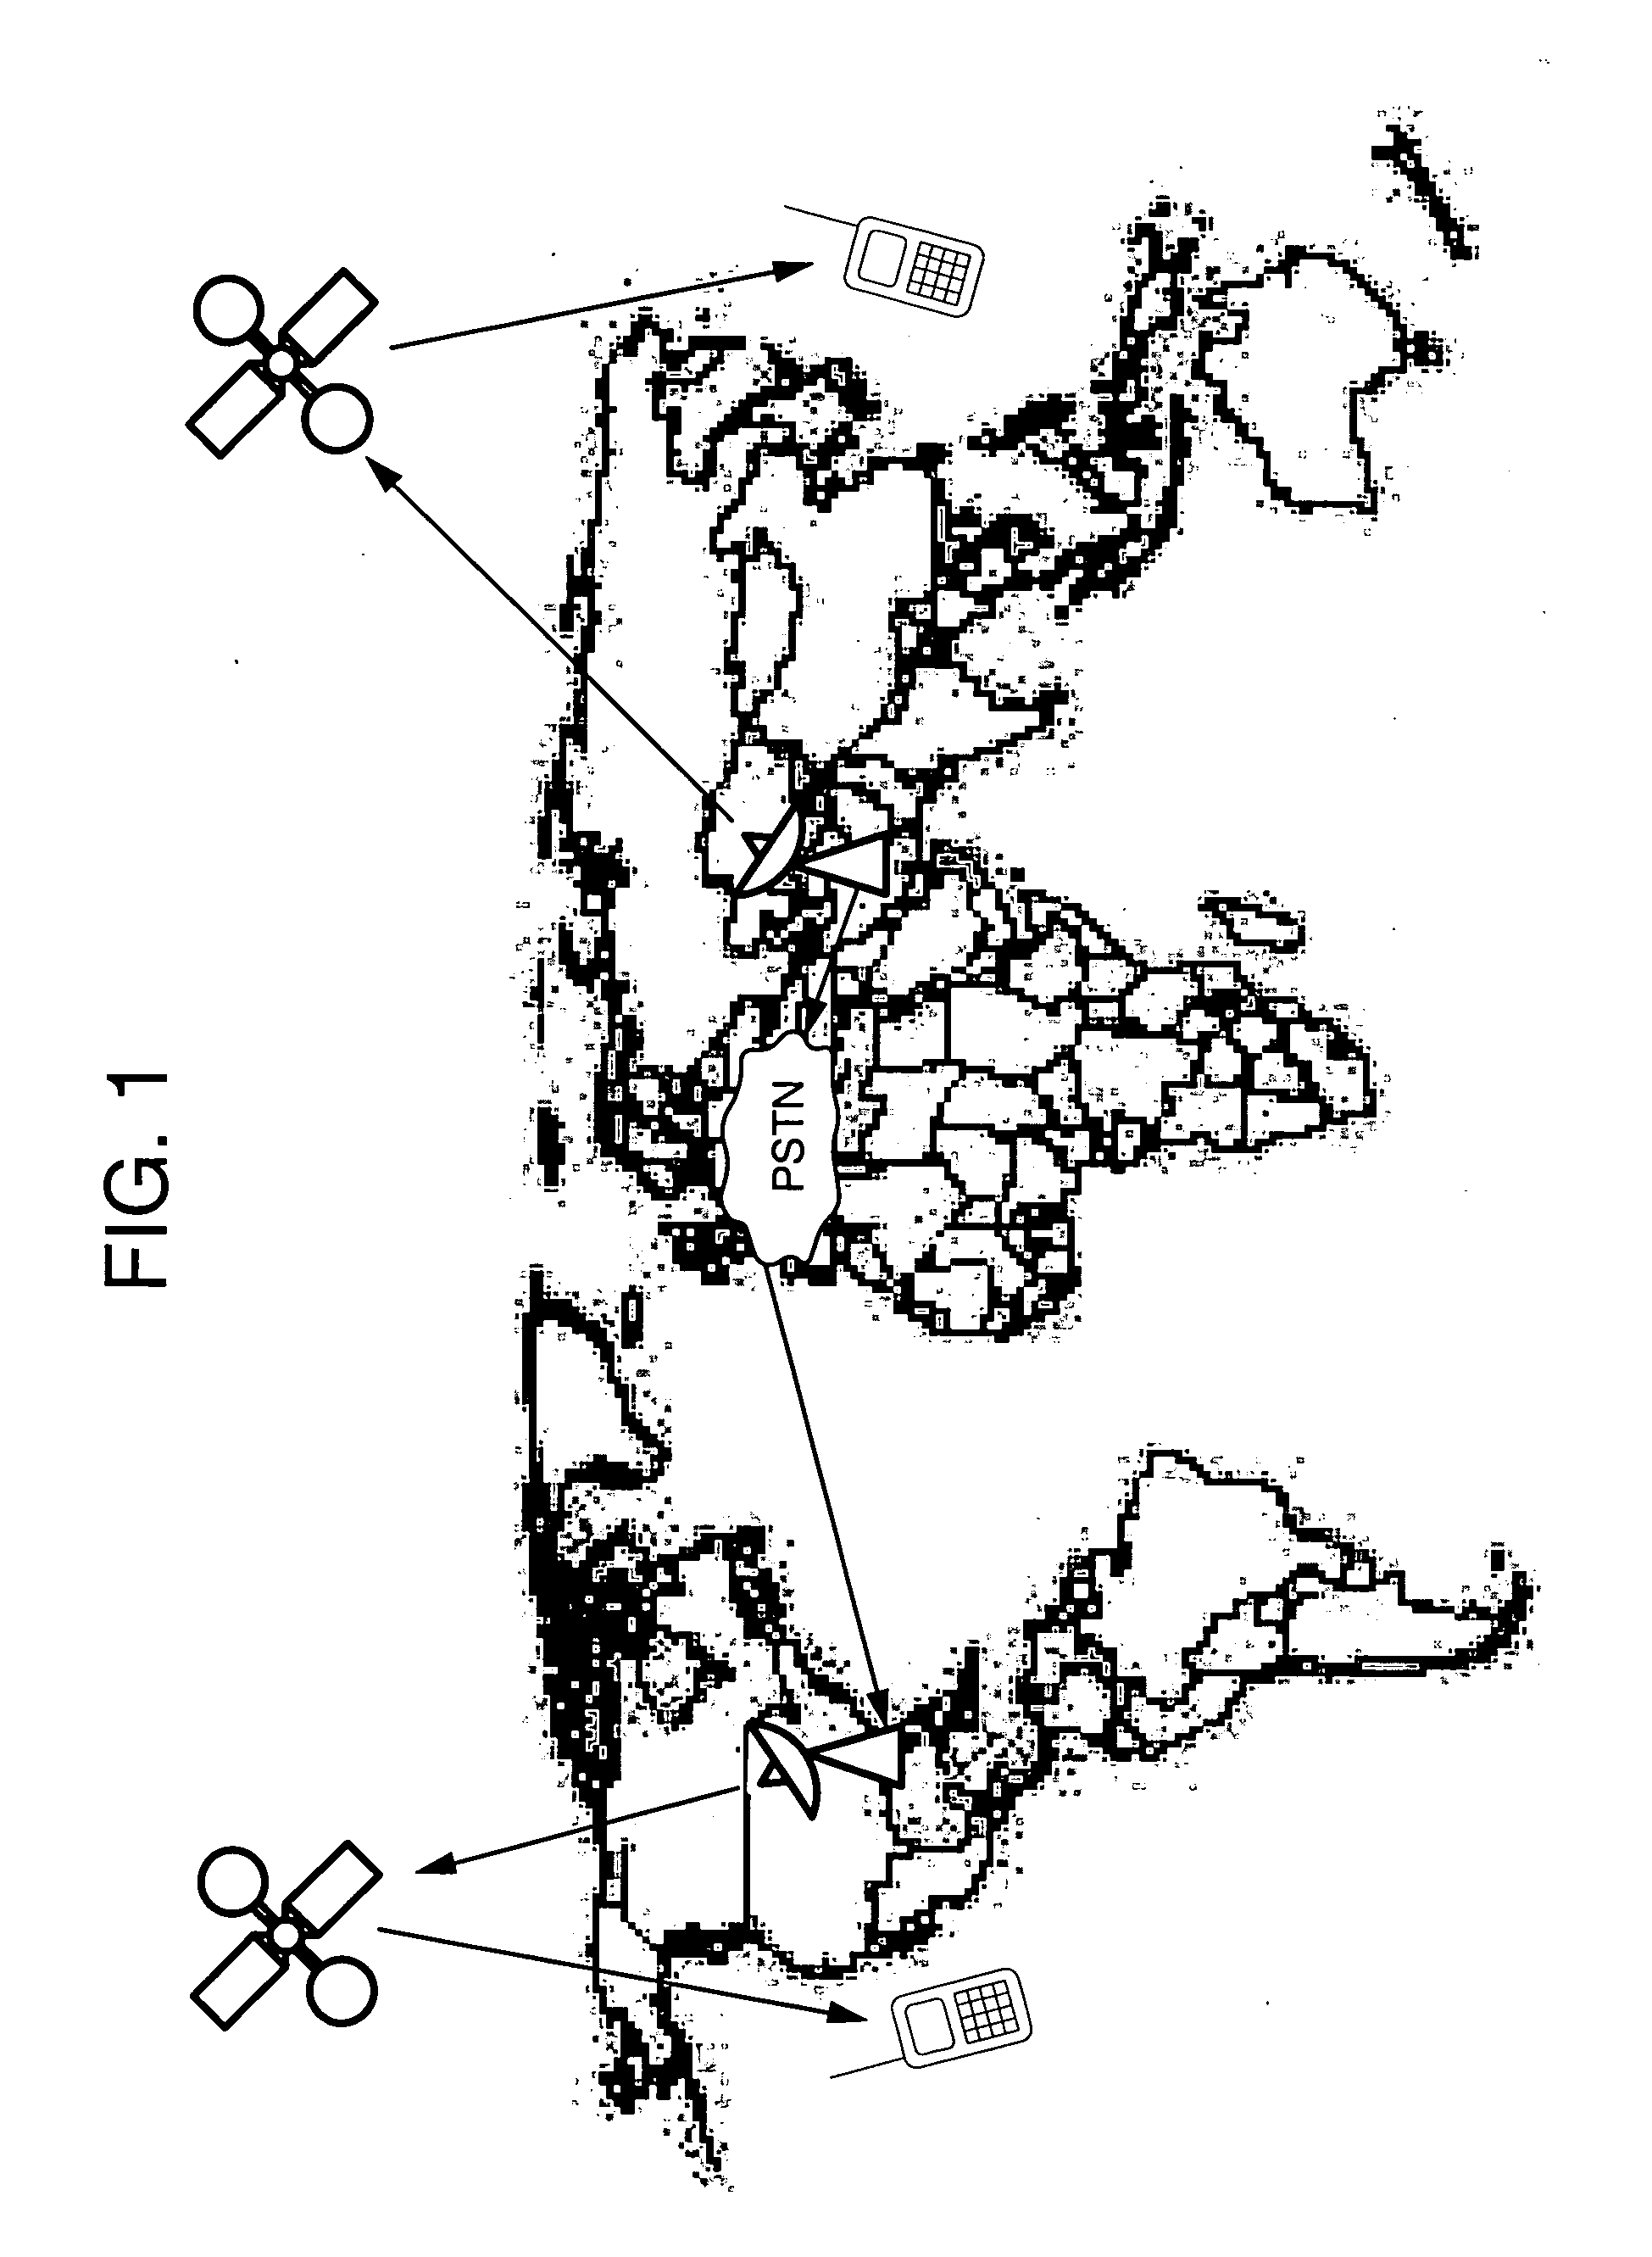 Satellite communication system employing a combination of time slots and orthogonal codes